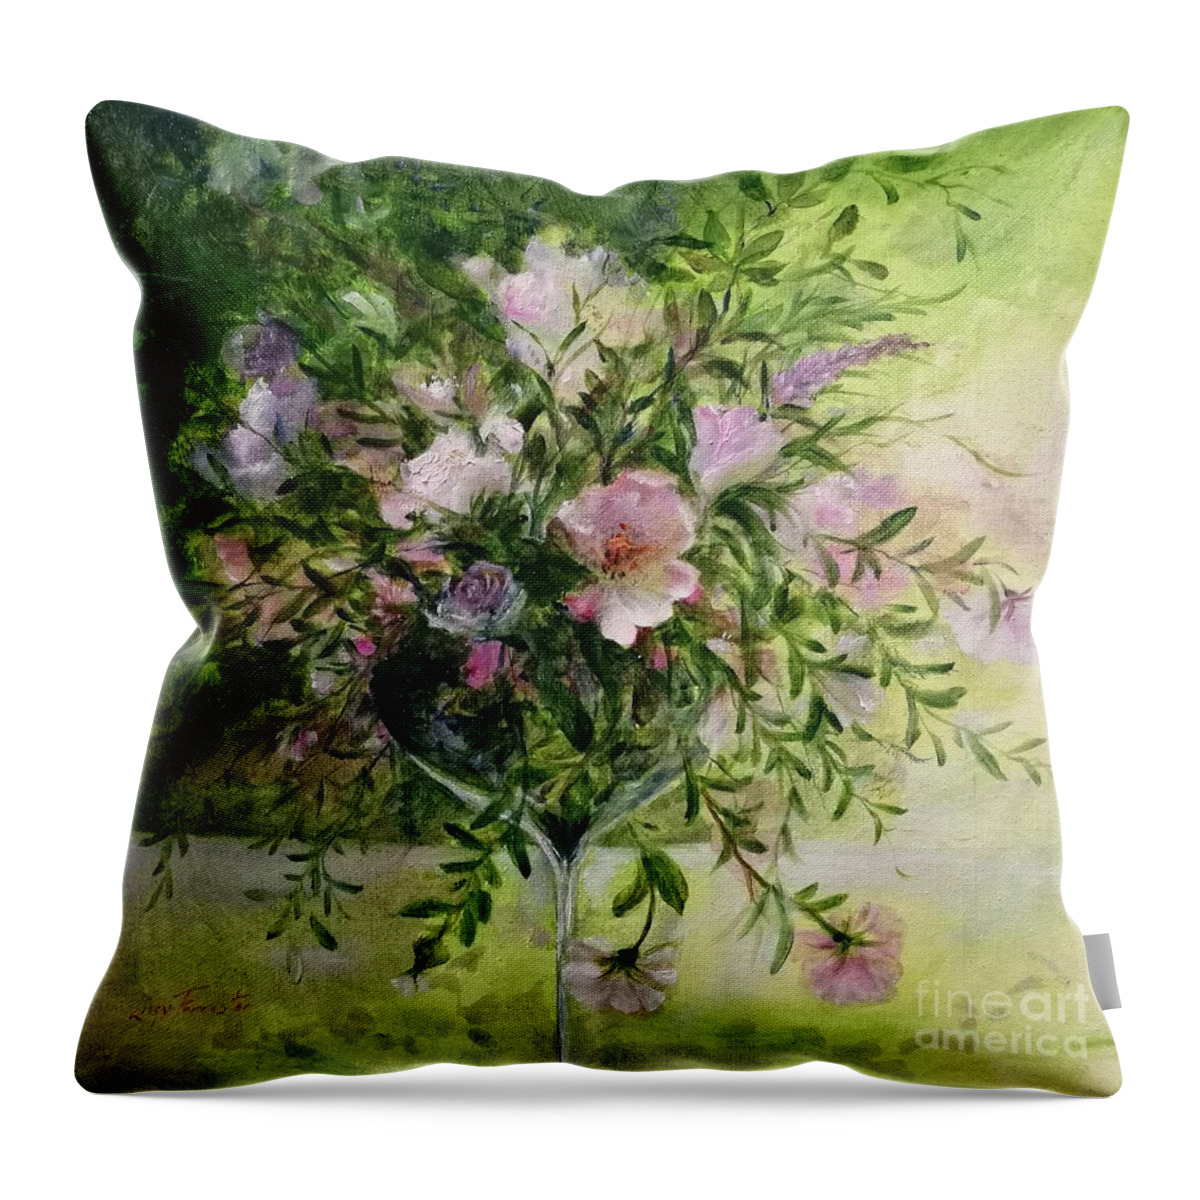 Gratitude Throw Pillow featuring the painting Gratitude by Lizzy Forrester